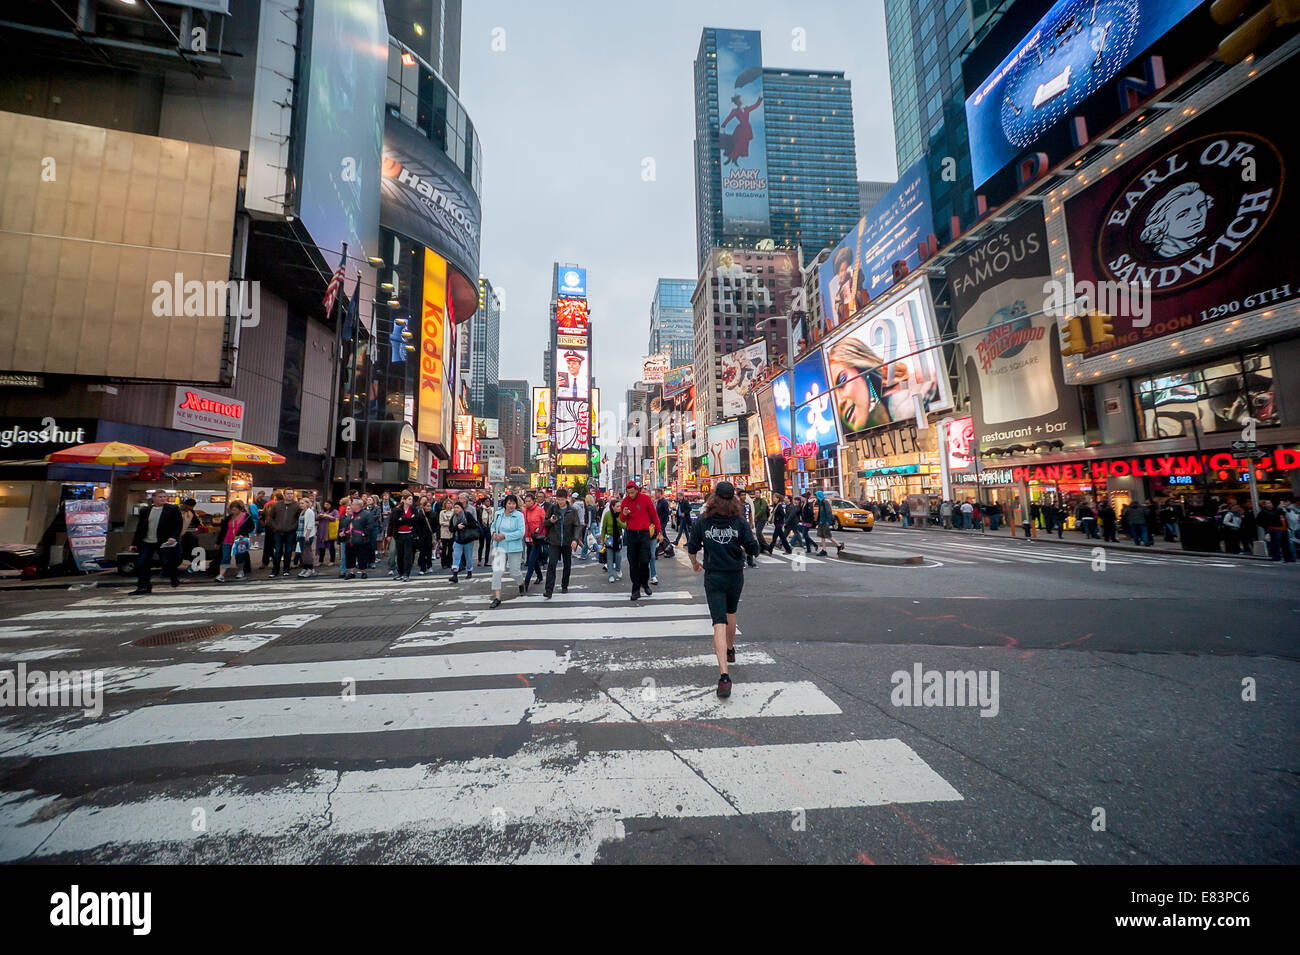 Tourists take in the sights and bright lights of Times Square New York City Stock Photo